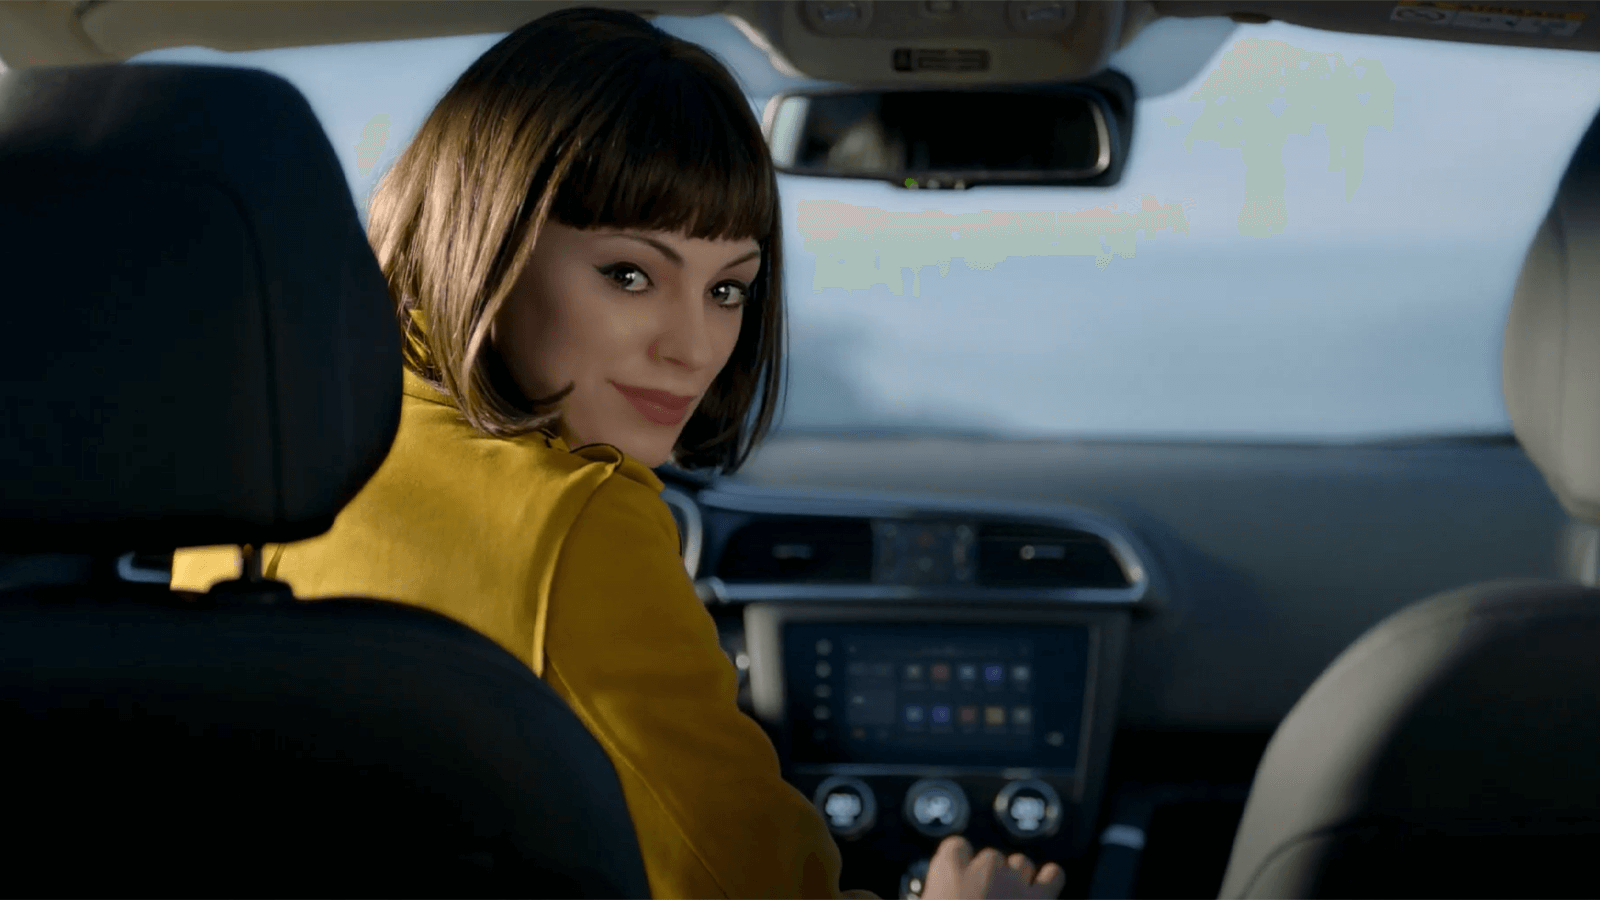 Renault's advertising campaign "Escape to real" featuring a virtual avatar